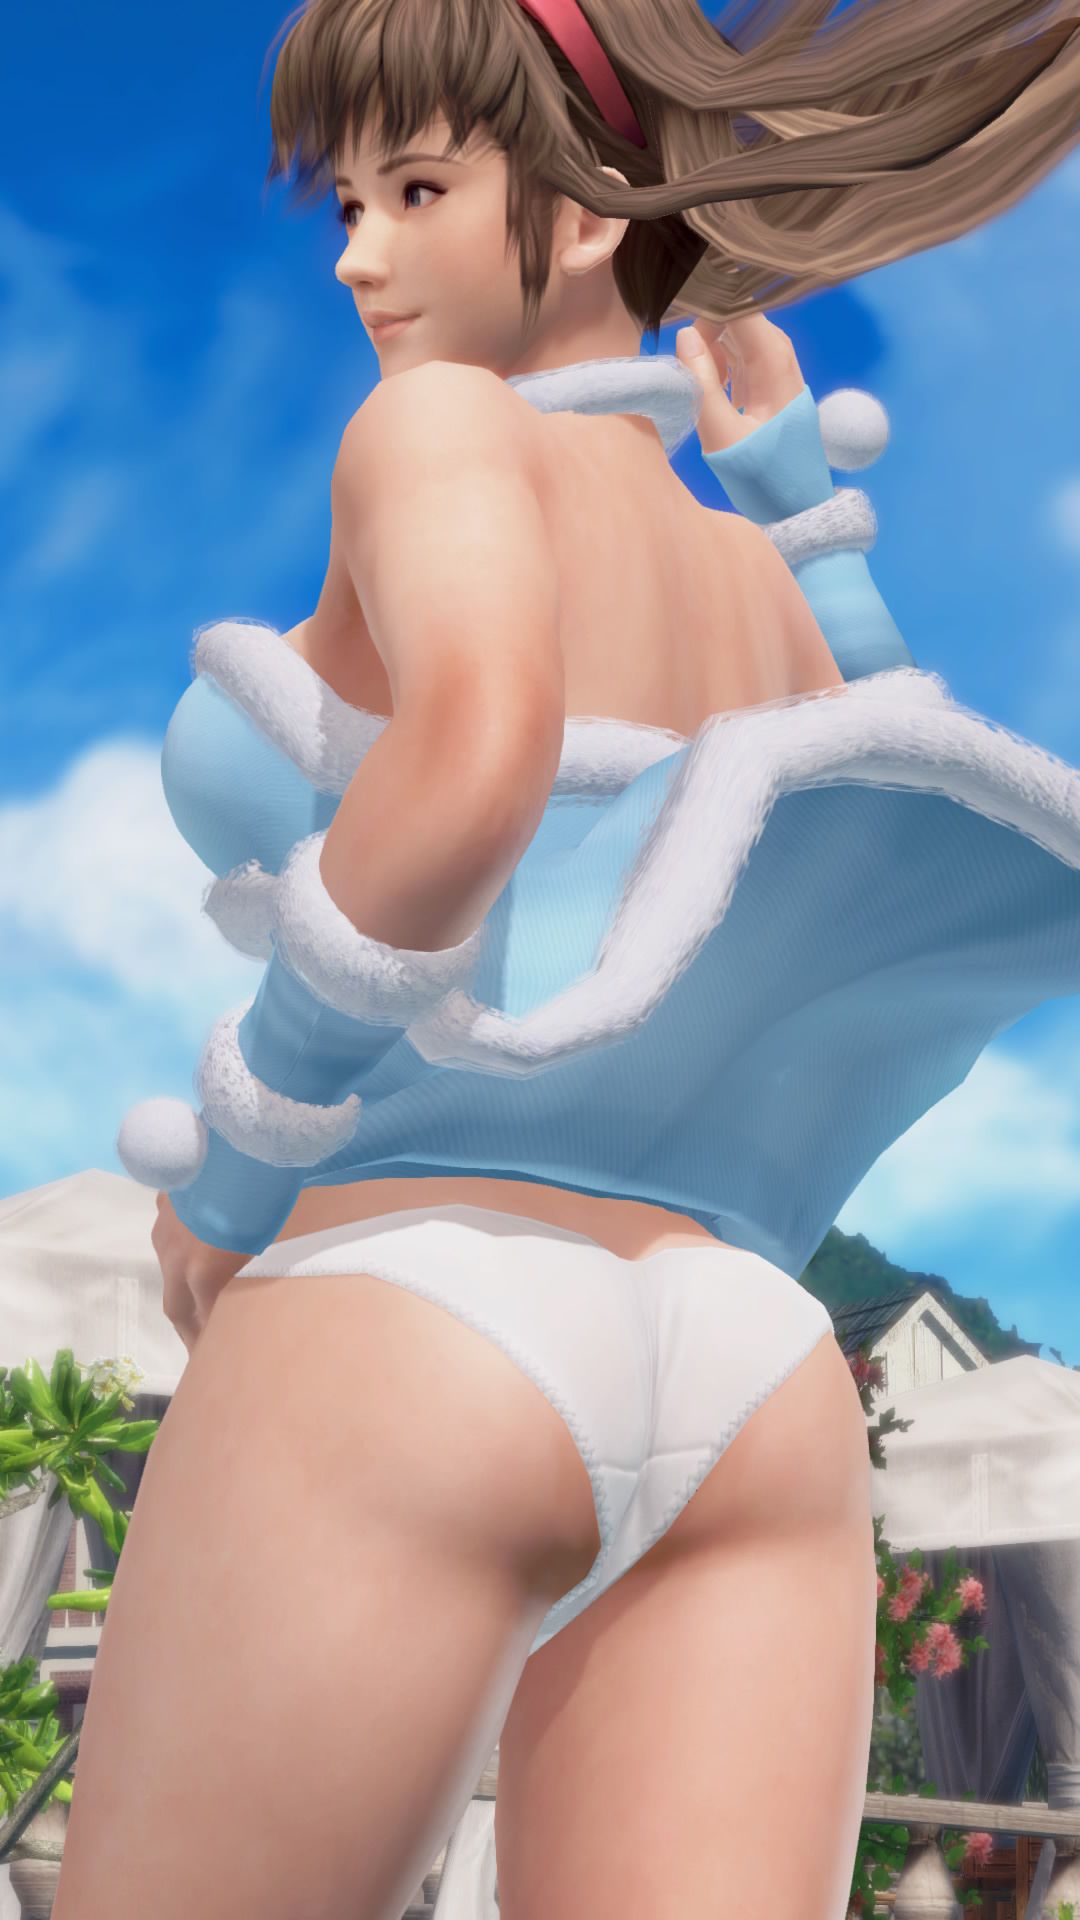 Merry Xmas from DOAX3 South Island! Photo session with new swimsuit Santa 15